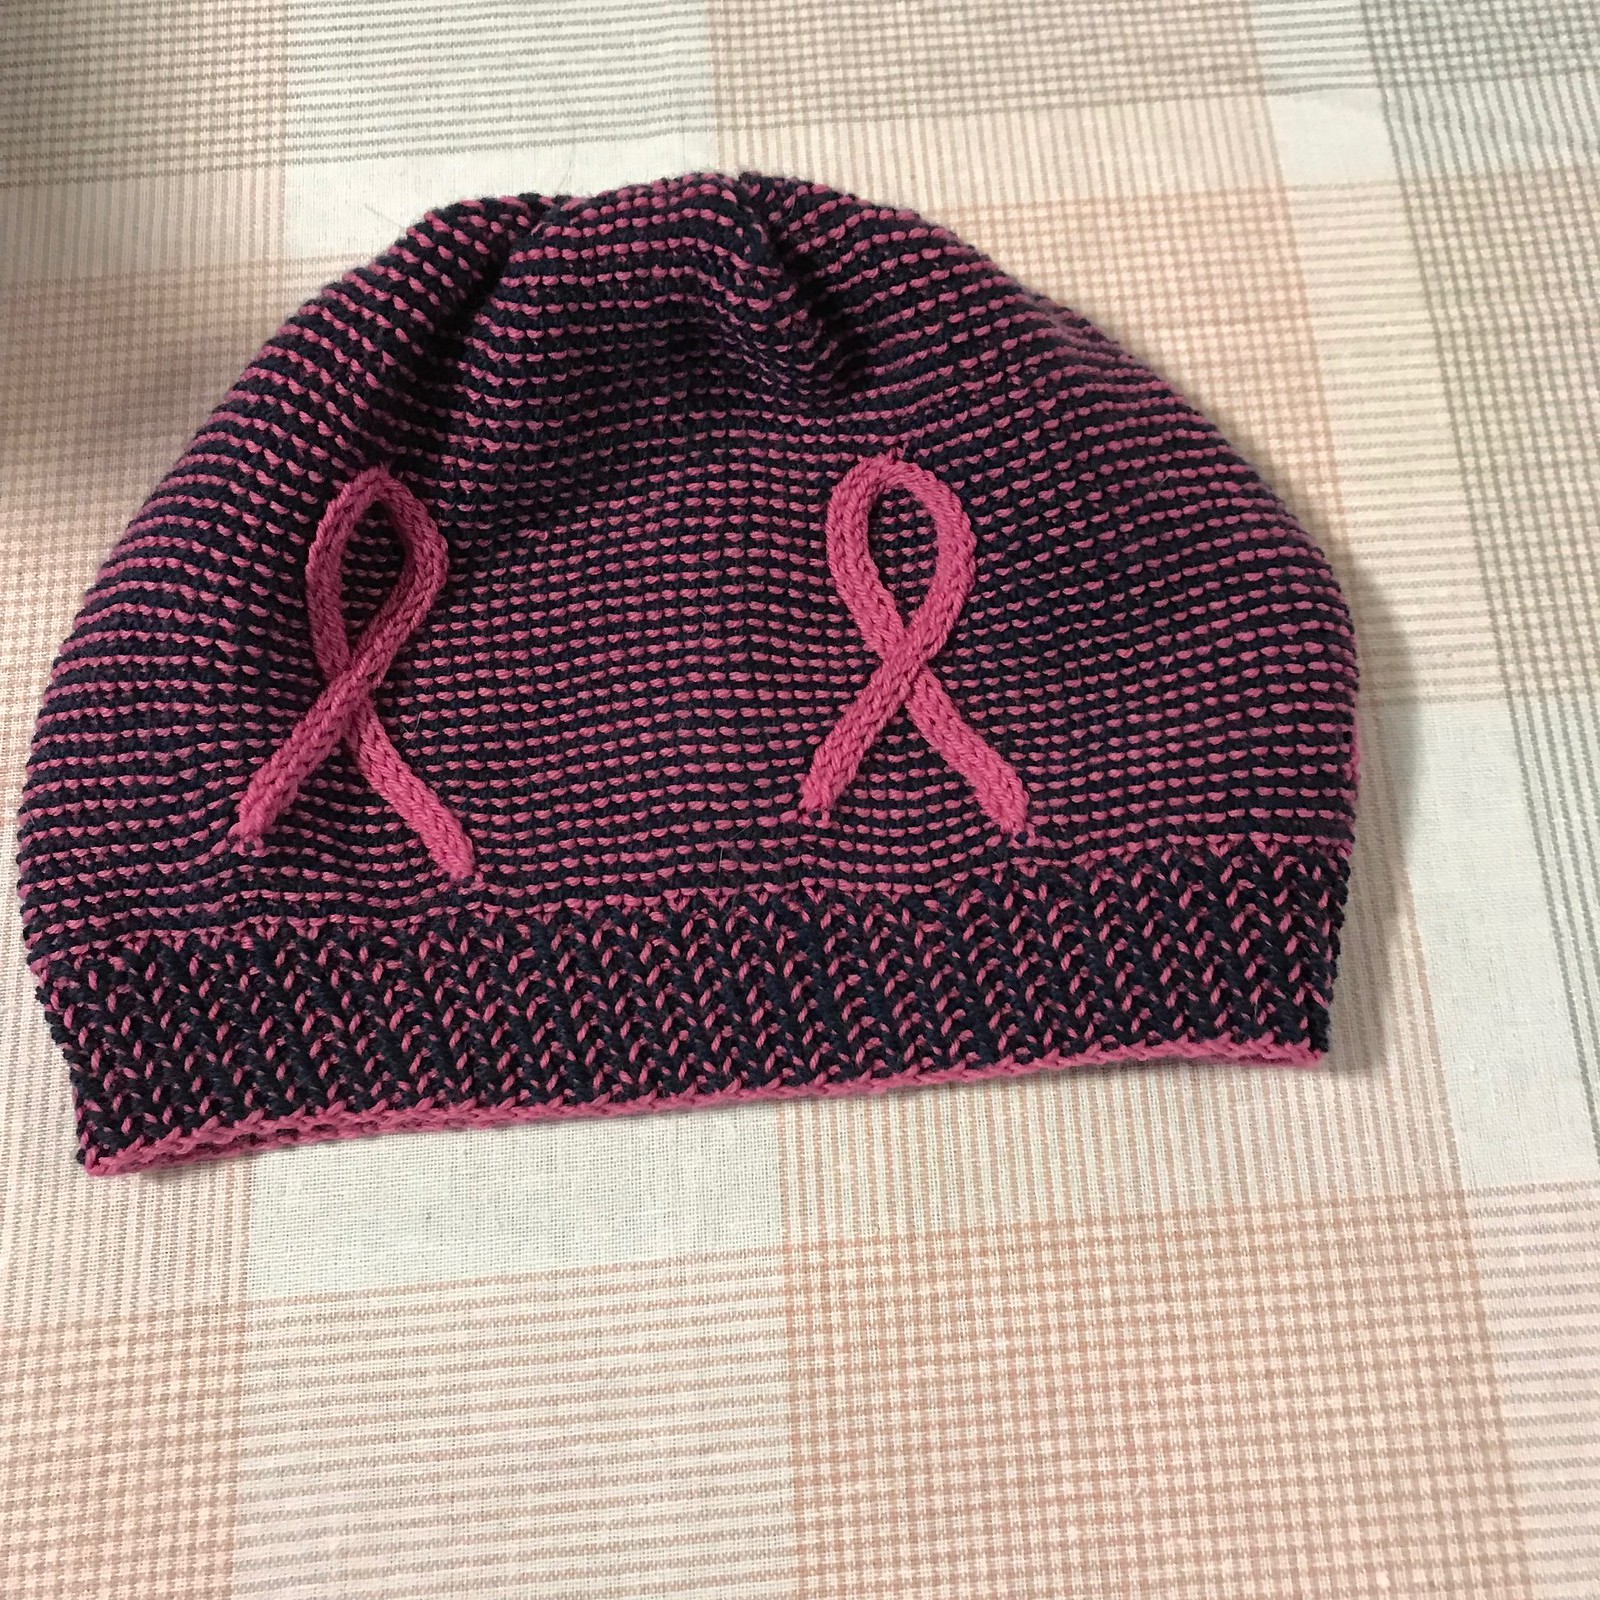 Sandi’s Breast Cancer Awareness hat test knit! Love the blue with pink!